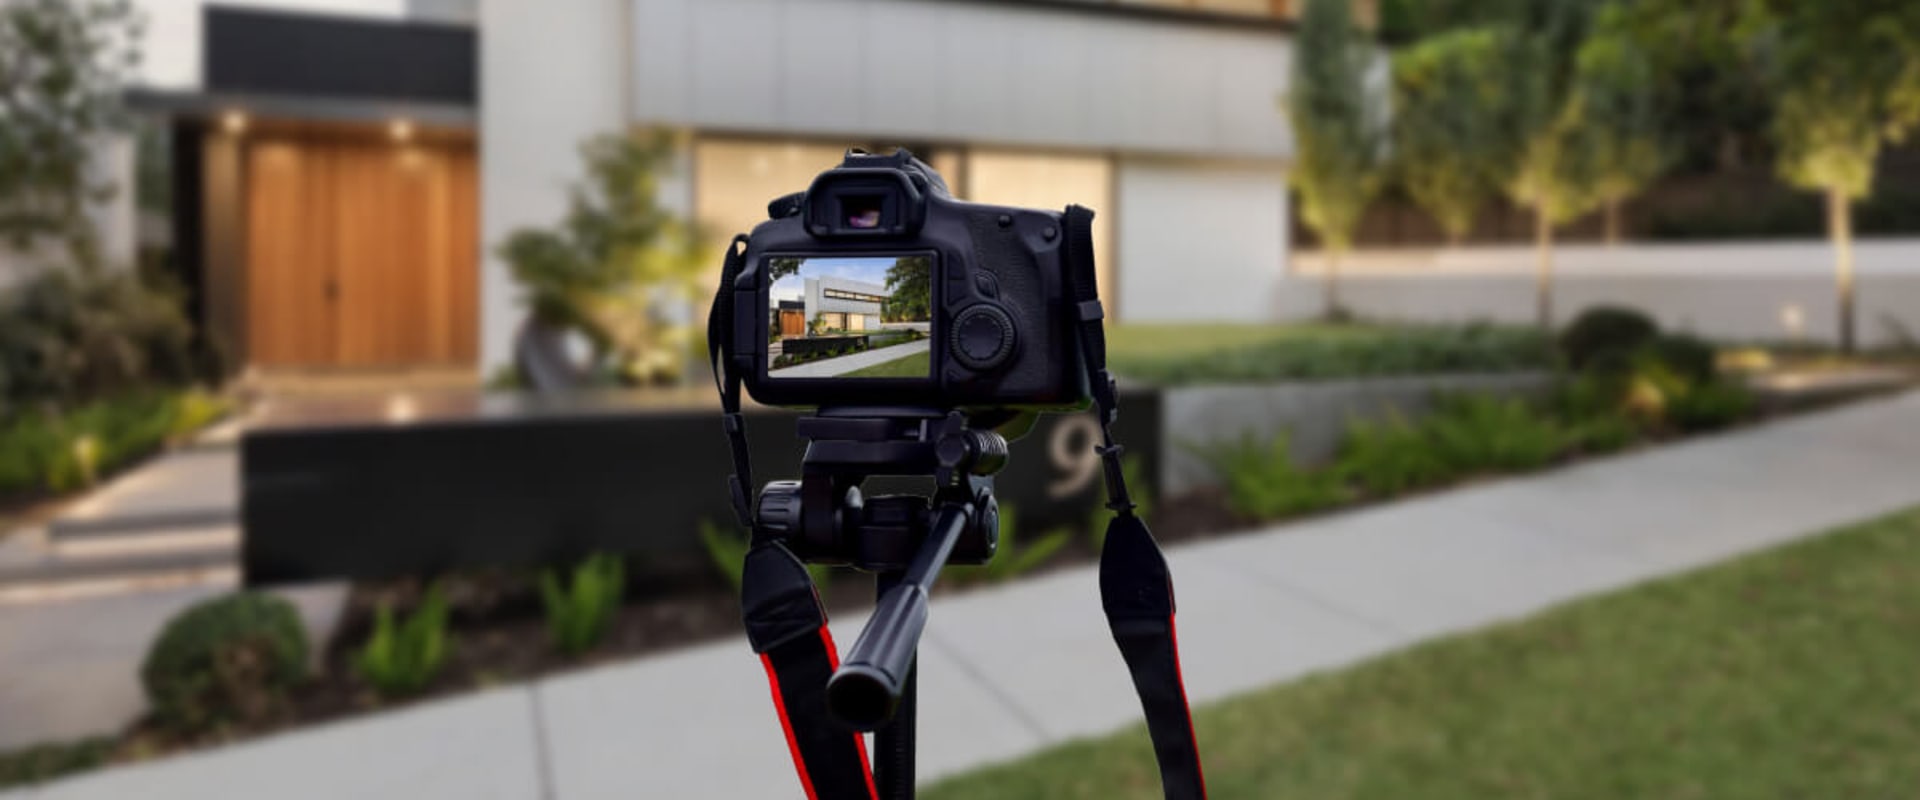 How Many Megapixels Do You Need for Real Estate Photography?